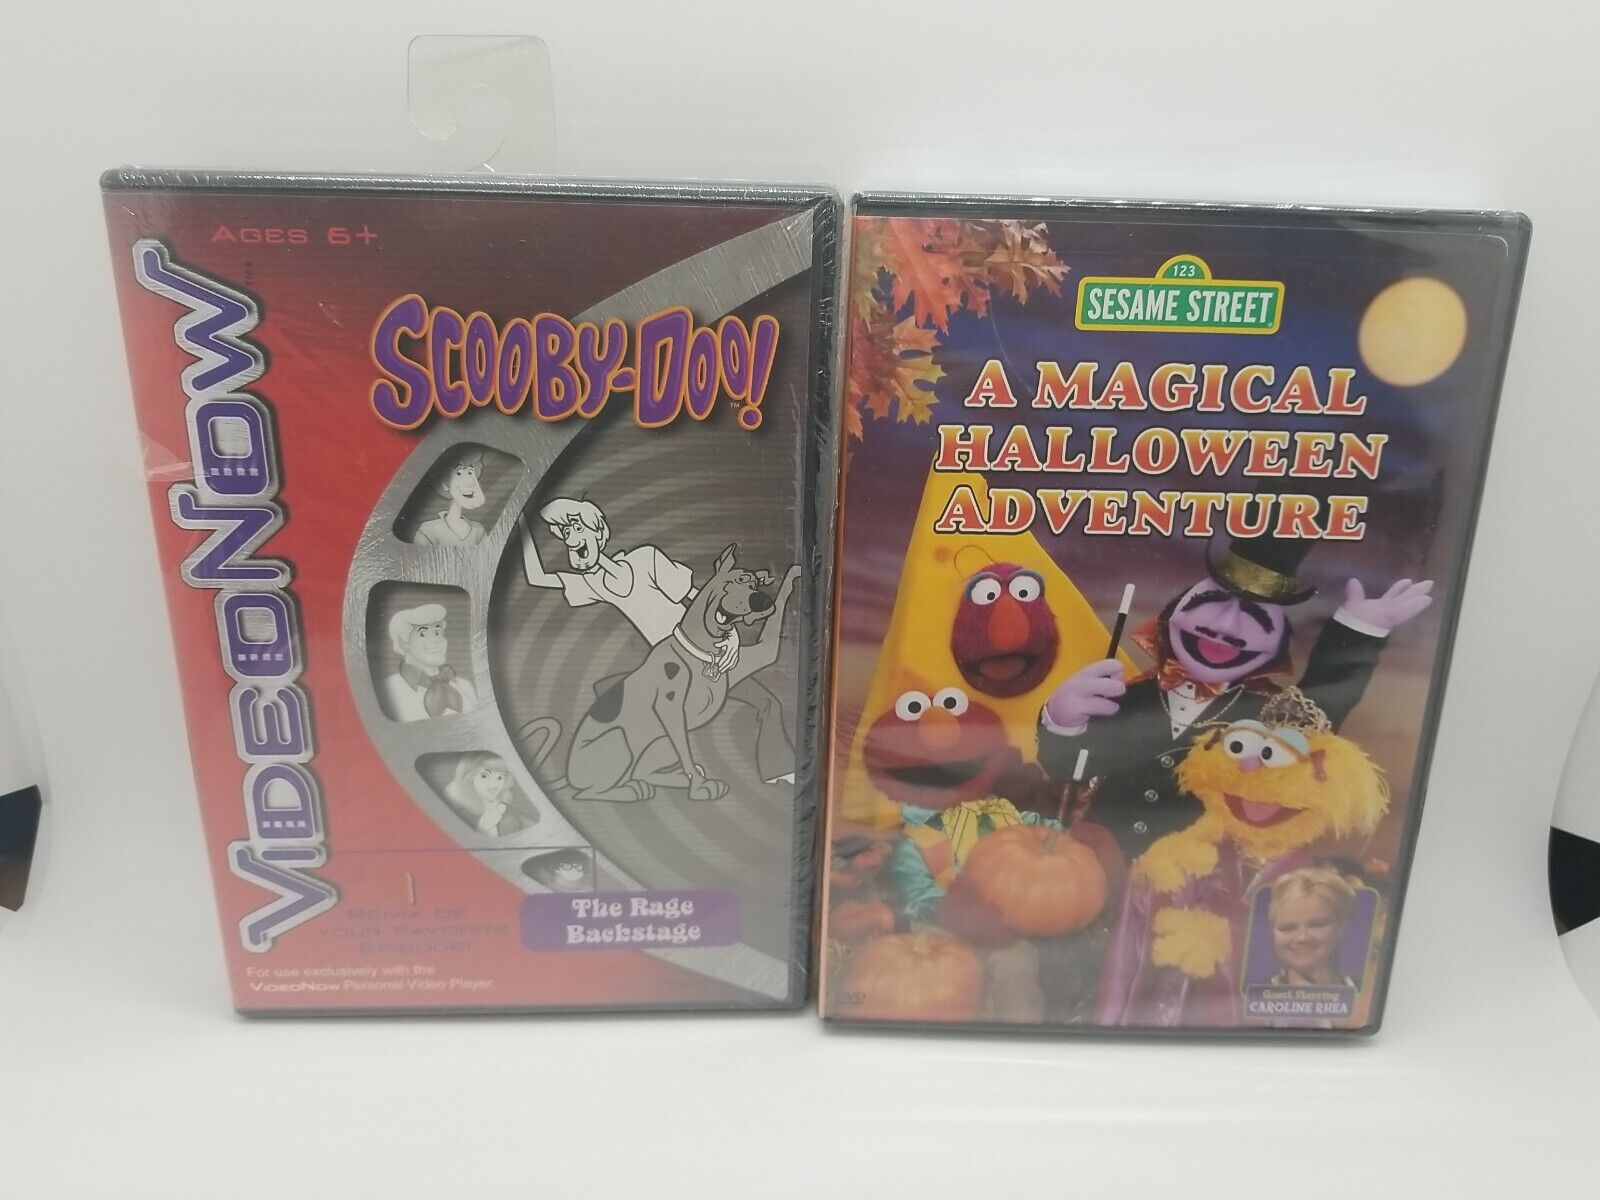 Video Now Personal Video Scooby-Doo The Rage Backstage & SESAME STREET HALLOWEEN VideoNow Does Not Apply